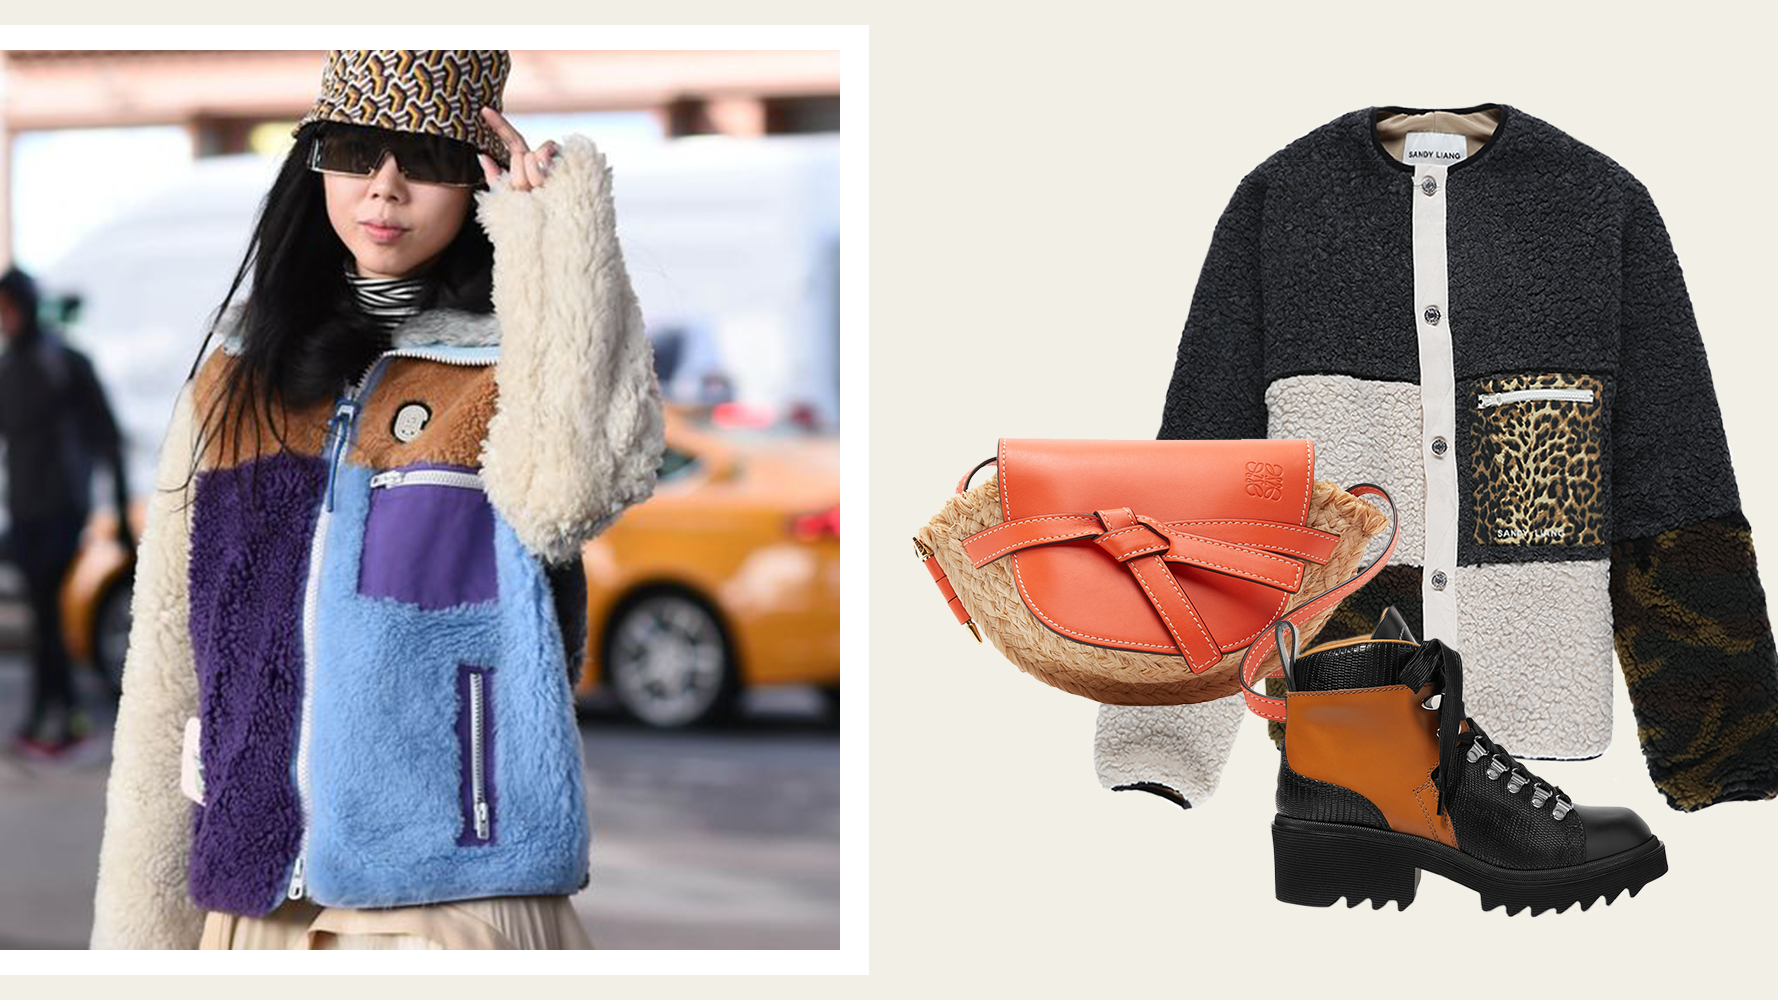 3 Winter Fashion Trends You Have To Try - The Thunderbird